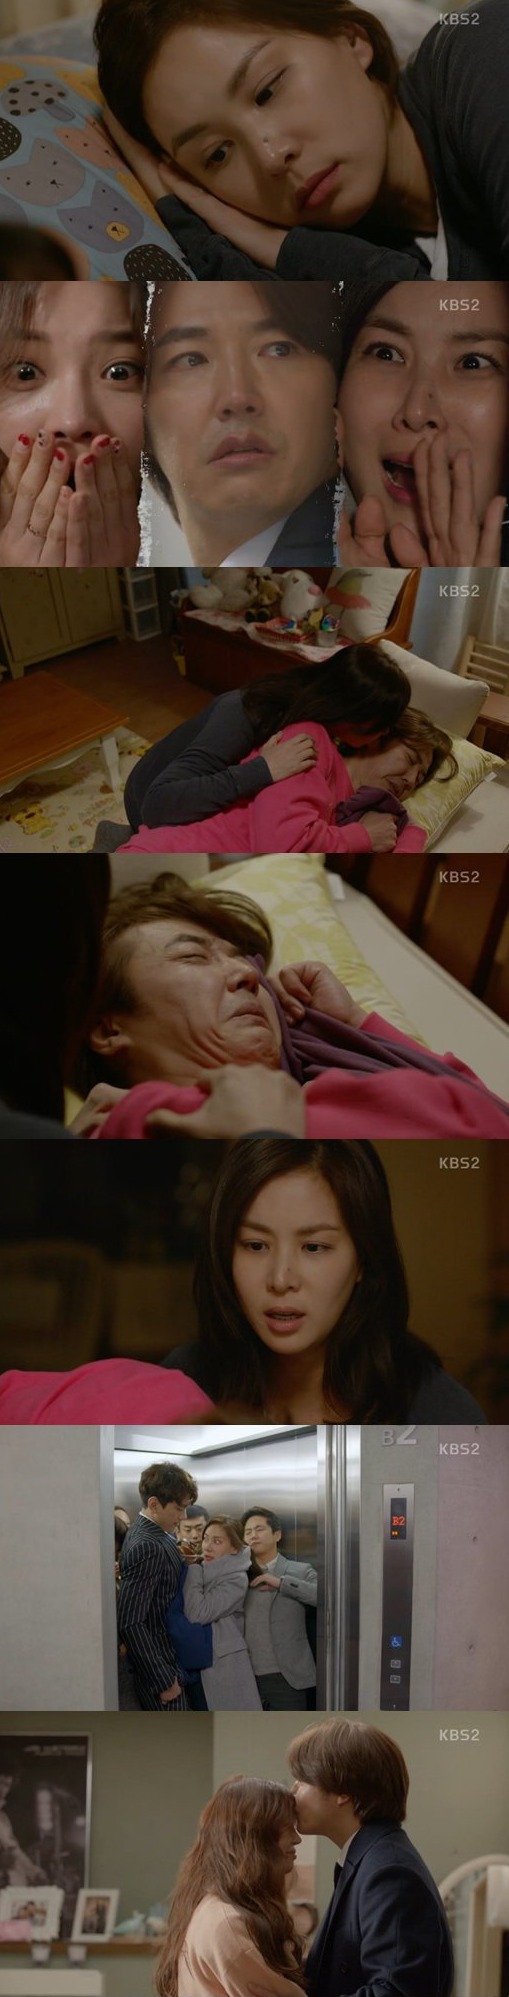 episode 1 captures for the Korean drama 'The Perfect Wife'